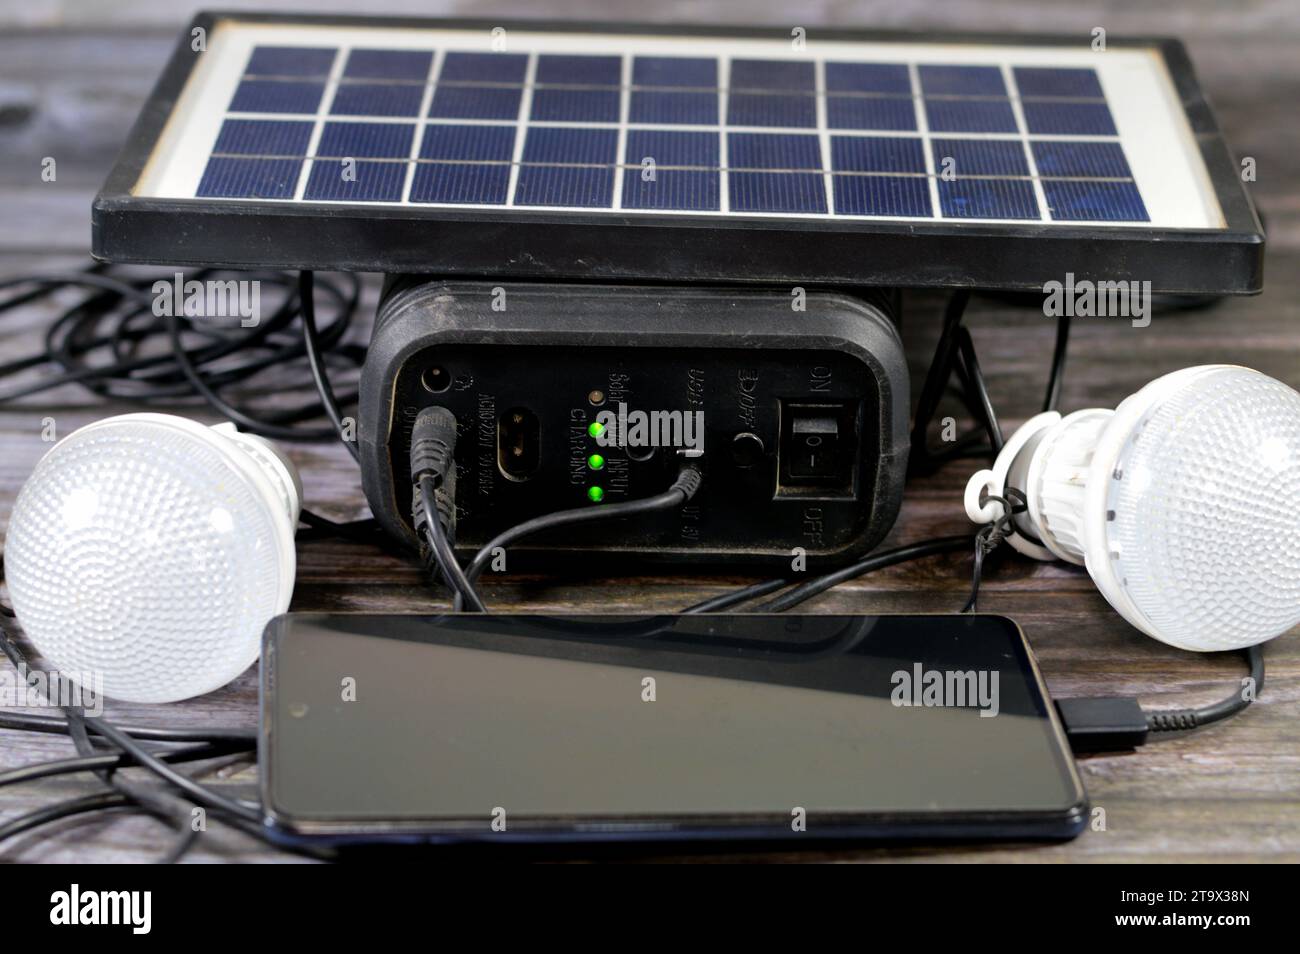 A multi purpose battery charged with a solar panel, a device that converts sunlight into electricity by using photovoltaic (PV) cells, with charging c Stock Photo